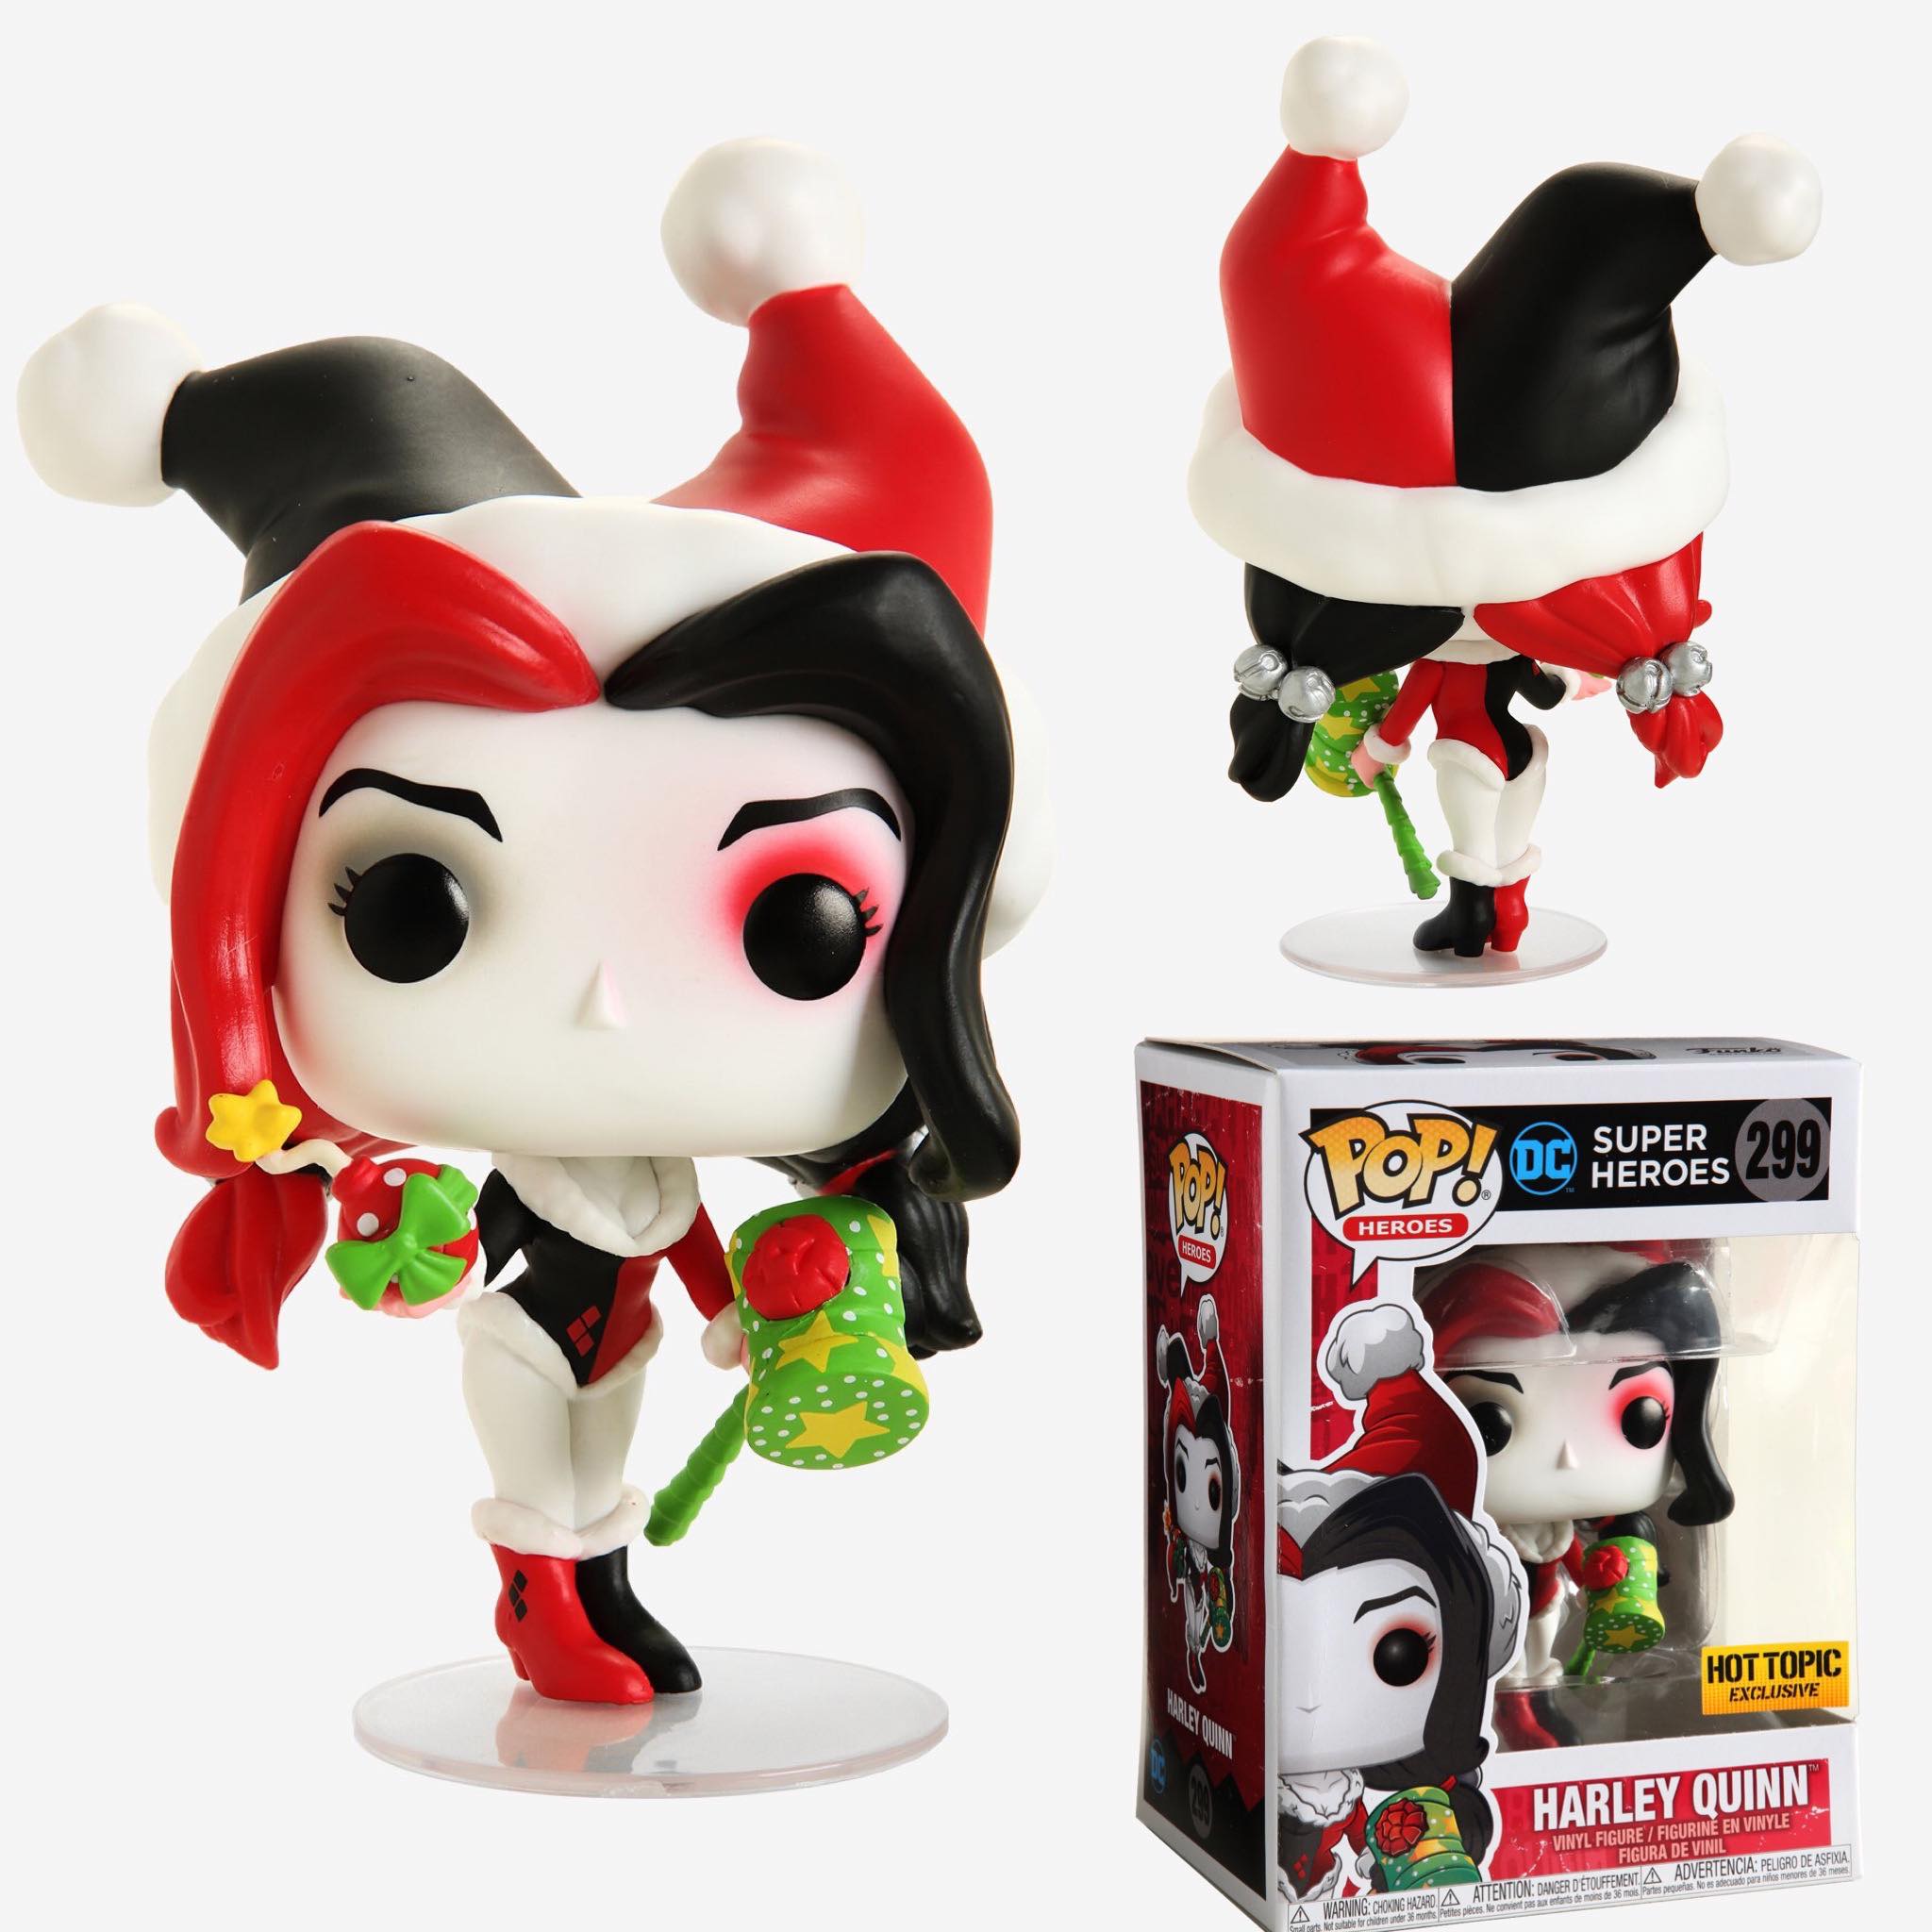 Out of box look at Hot Topic exclusive Funko Pop Holiday Harley Quinn! Releasing Thursday in stores and online.